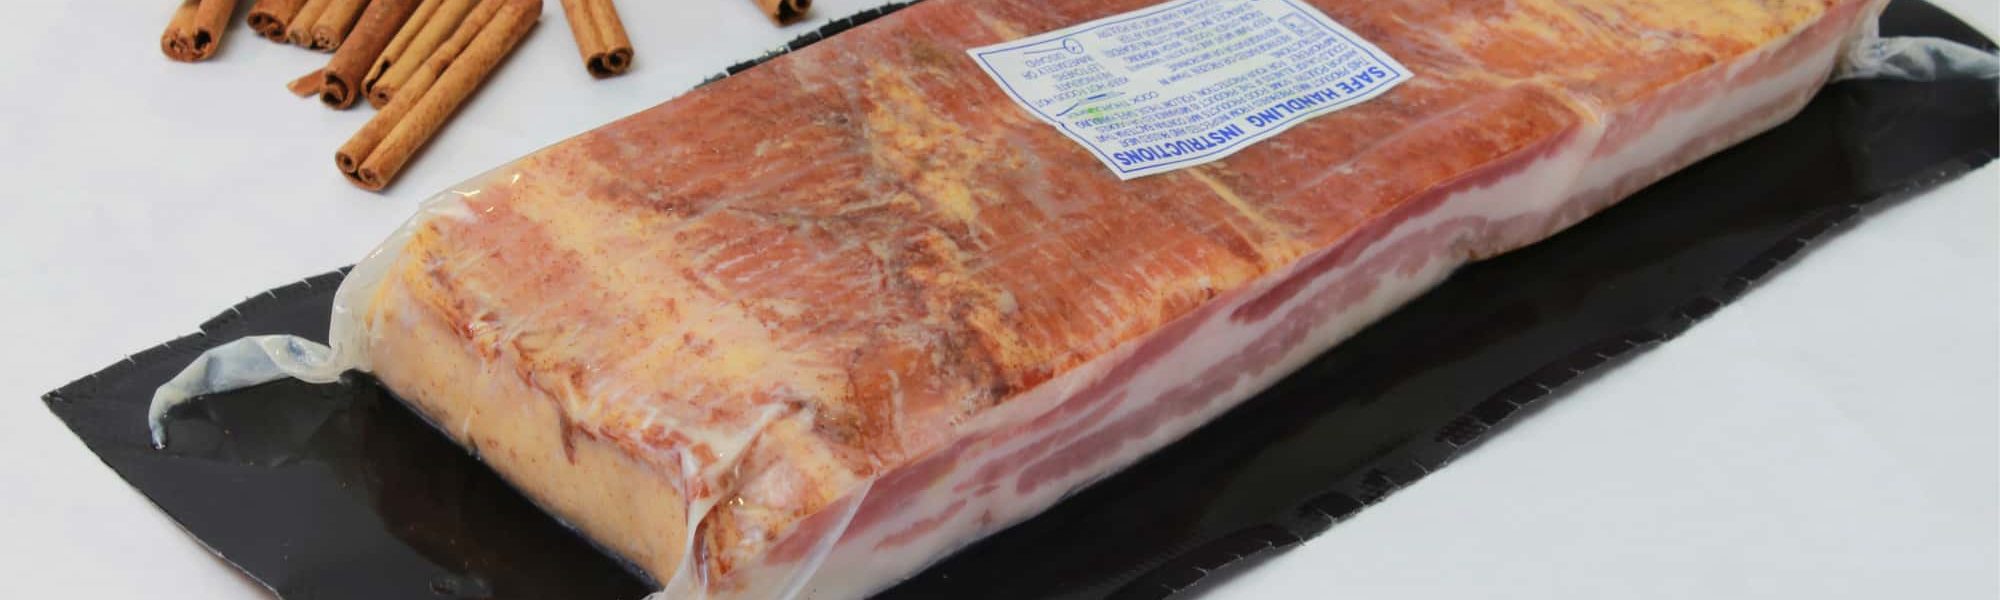 A package of gourmet bacon ready for storage or consumption.